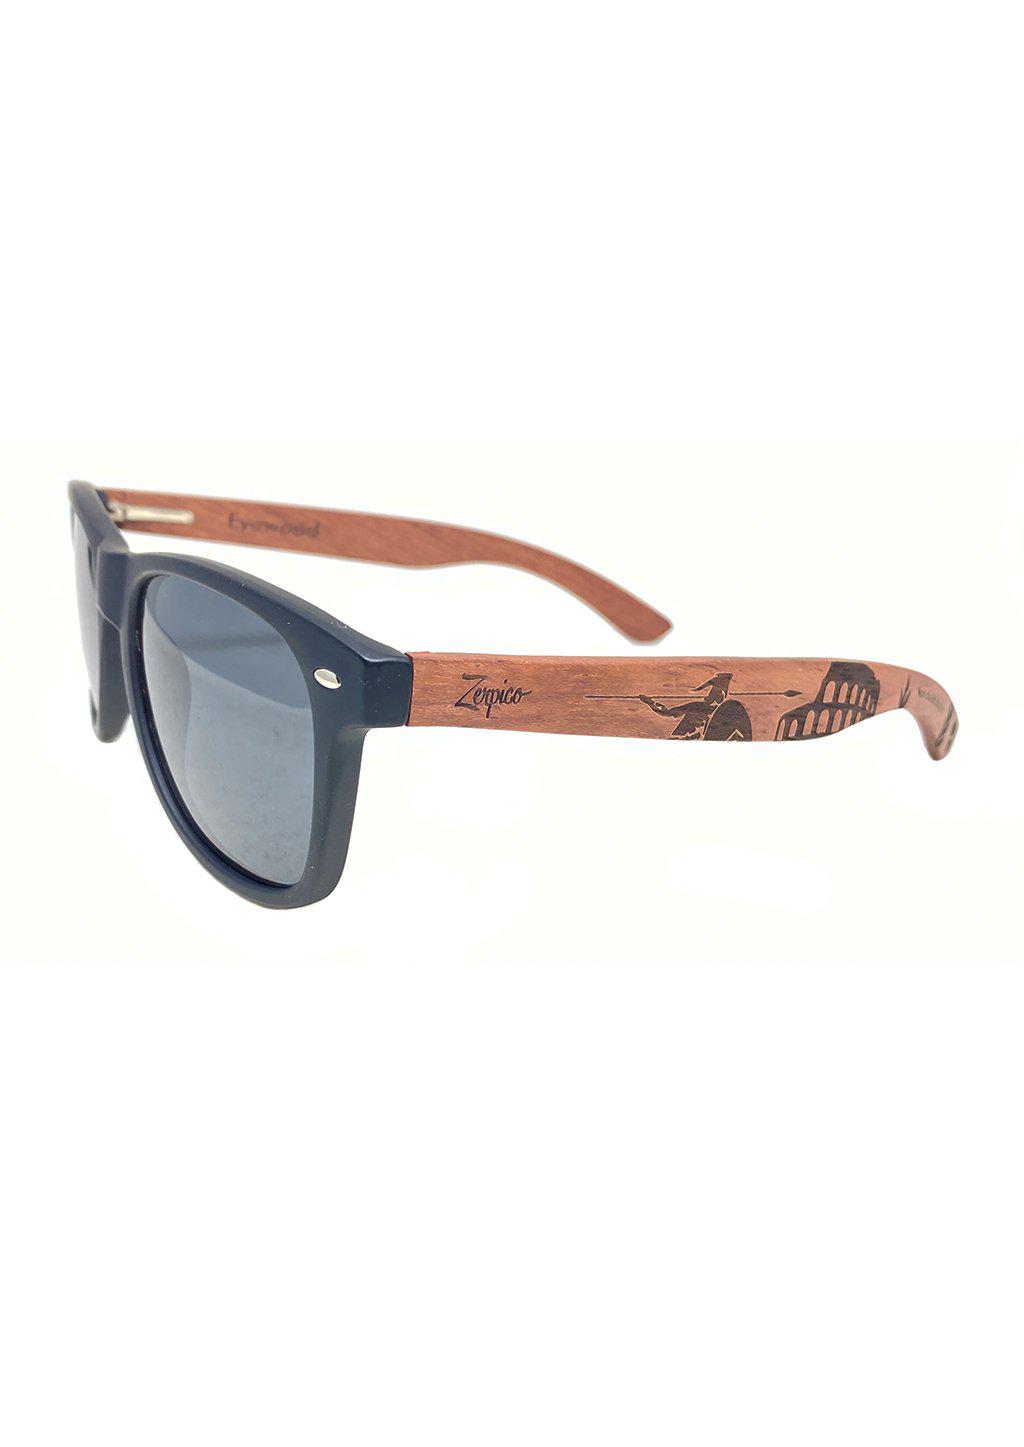 Engraved wooden sunglasses - Gladiator is inspired of the Gladiators from Ancient Rome. Studio photo from the side.